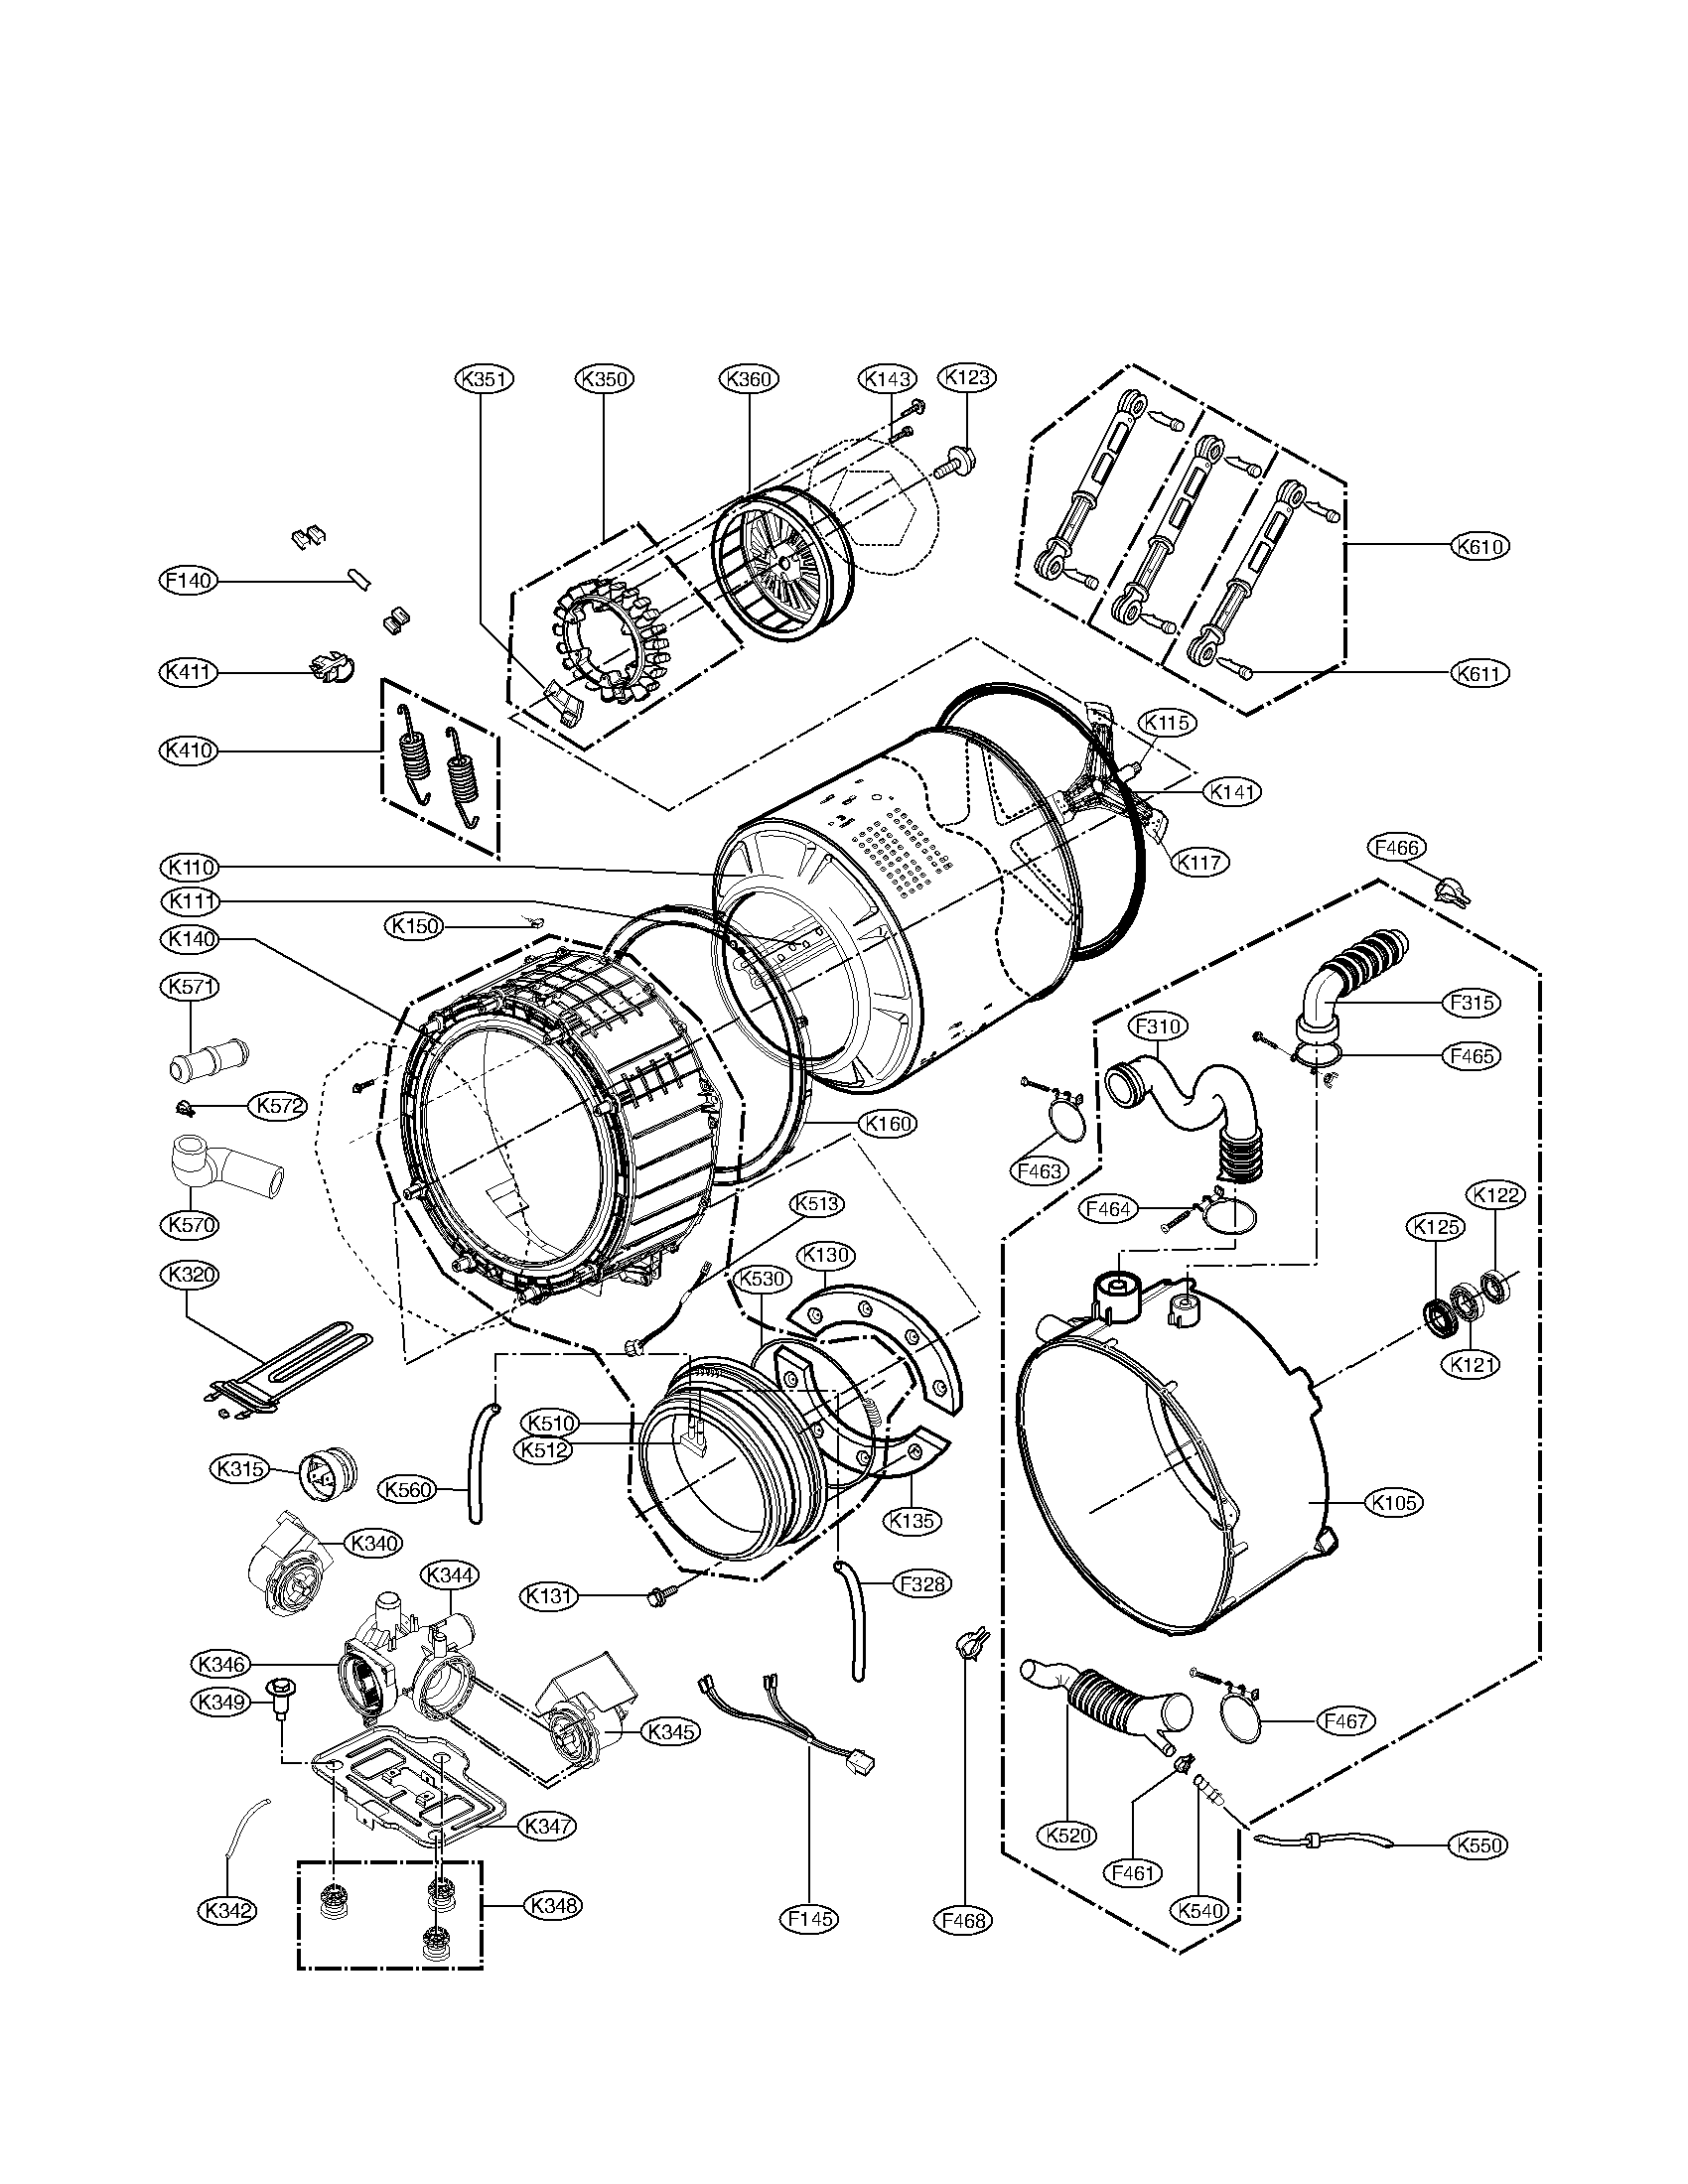 Drum And Tub Assembly Parts Diagram  U0026 Parts List For Model